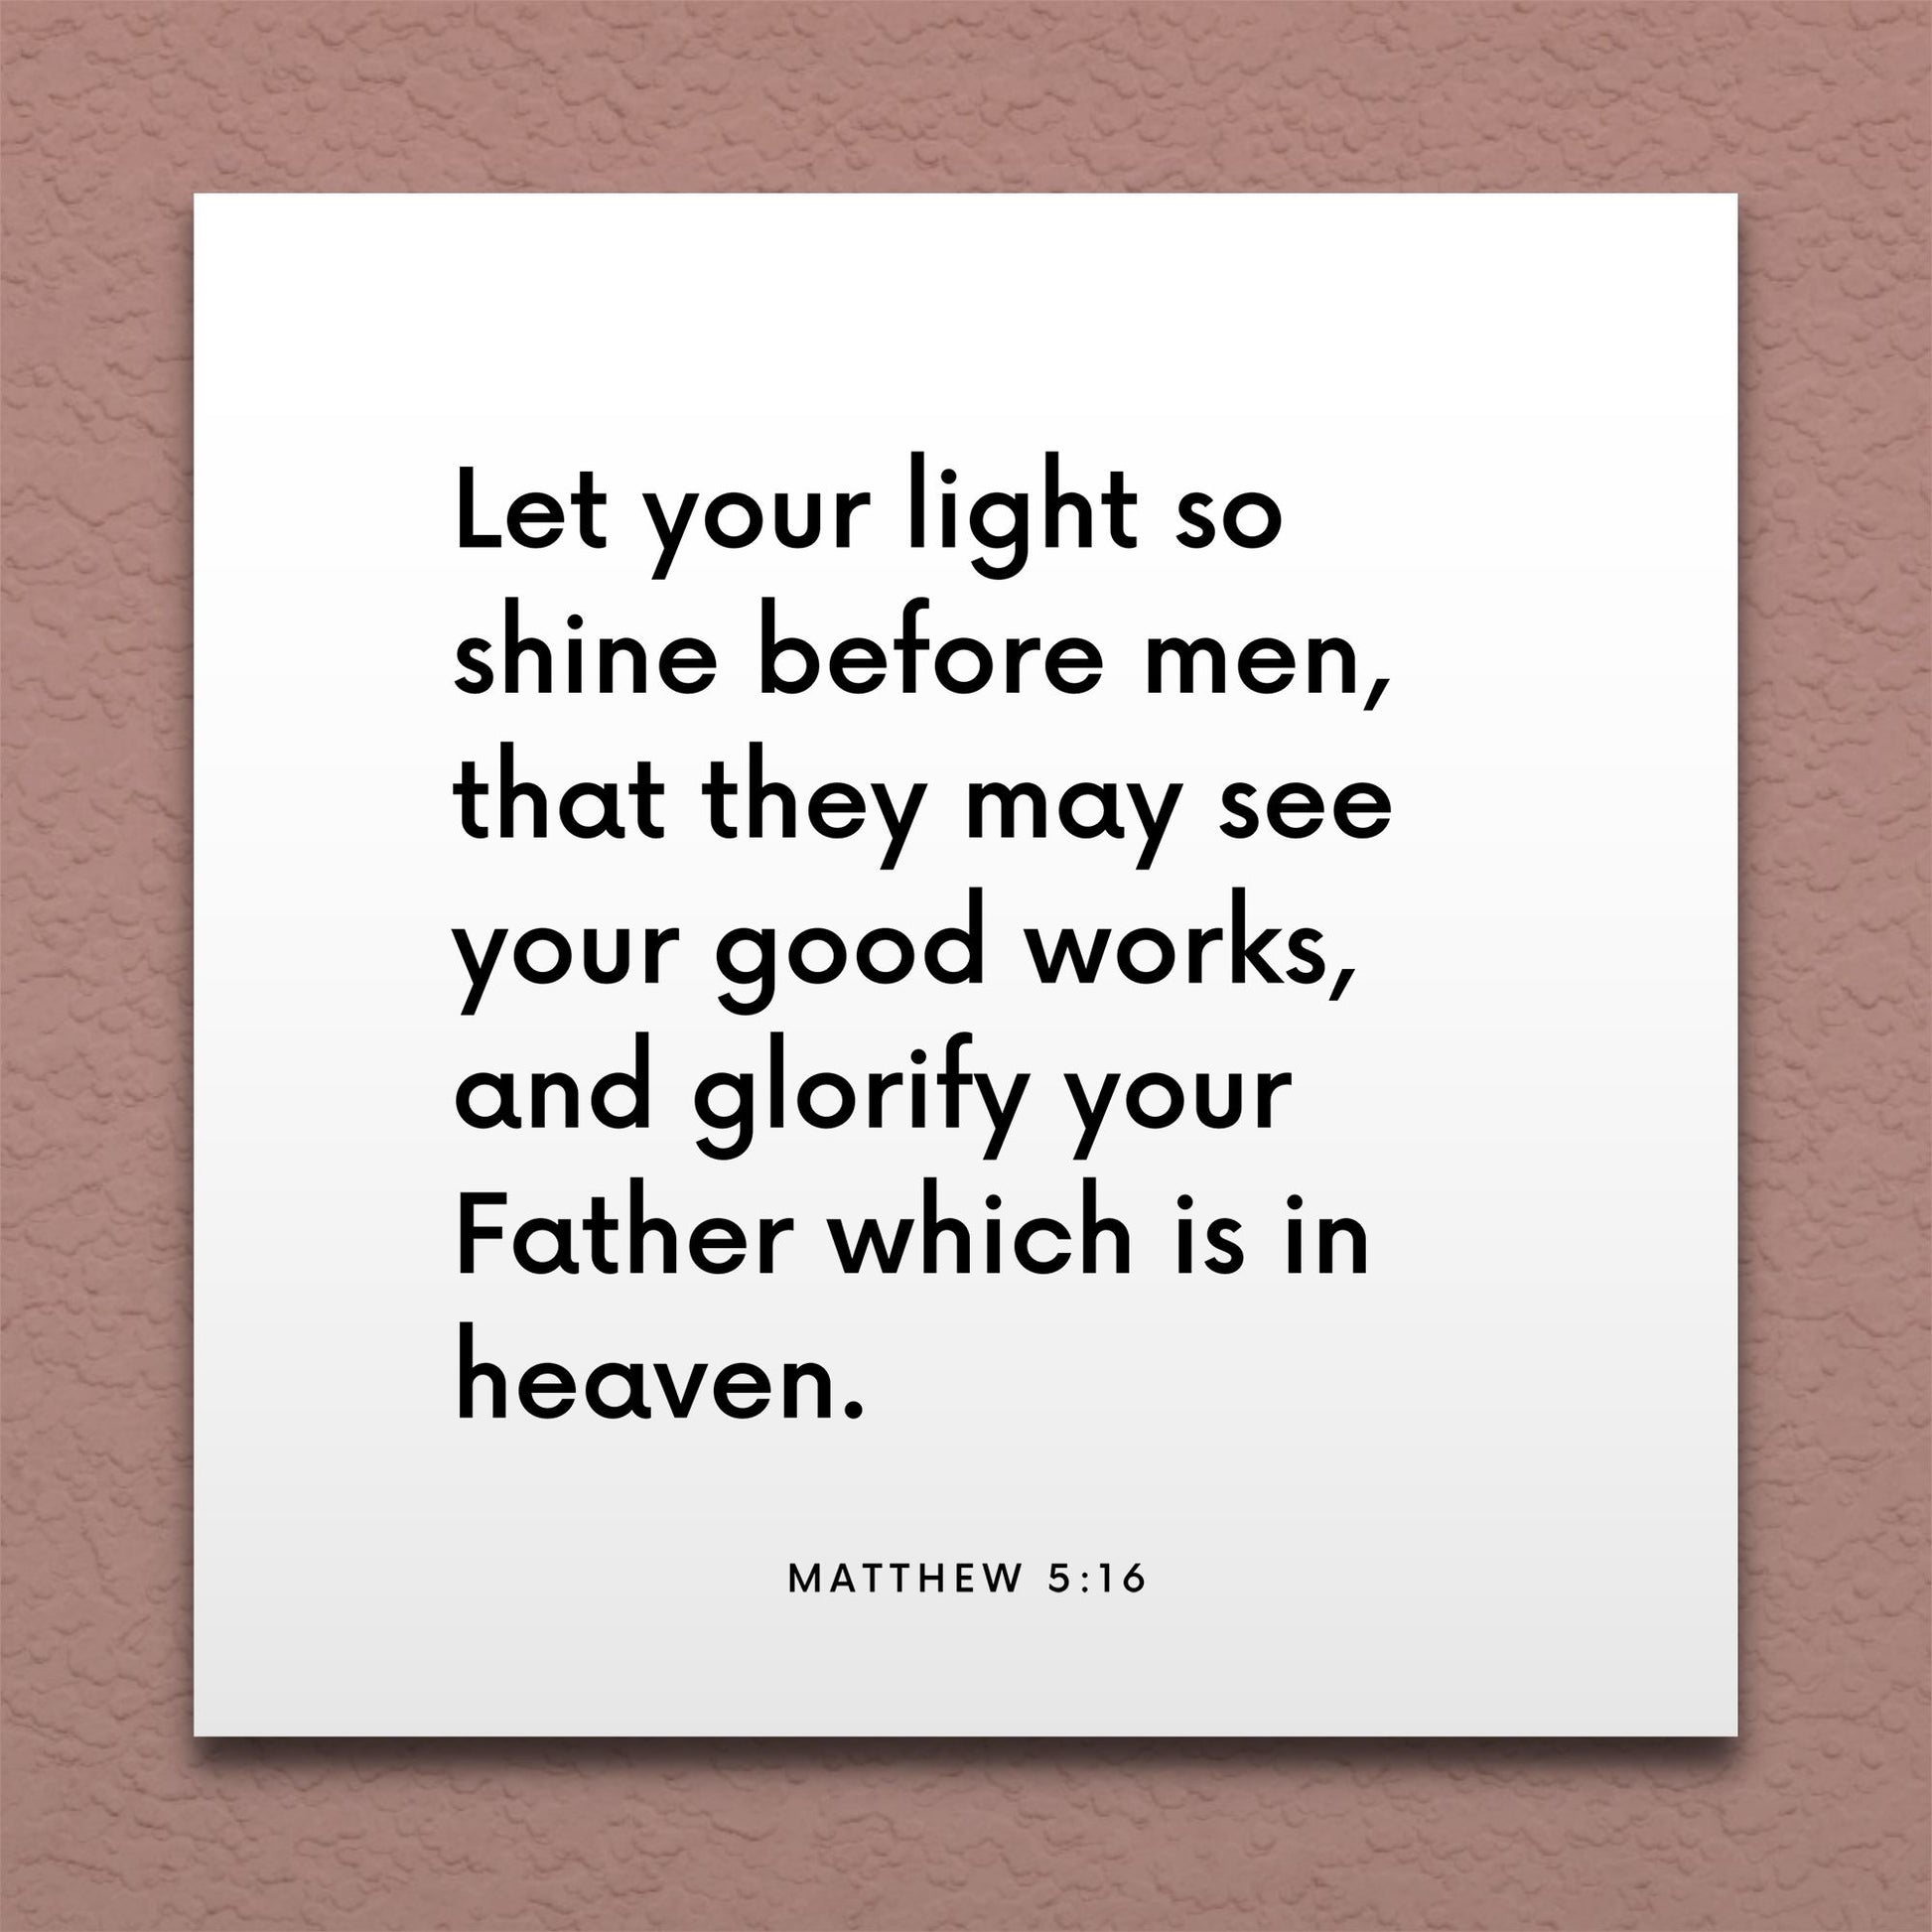 Wall-mounted scripture tile for Matthew 5:16 - "Let your light so shine before men"